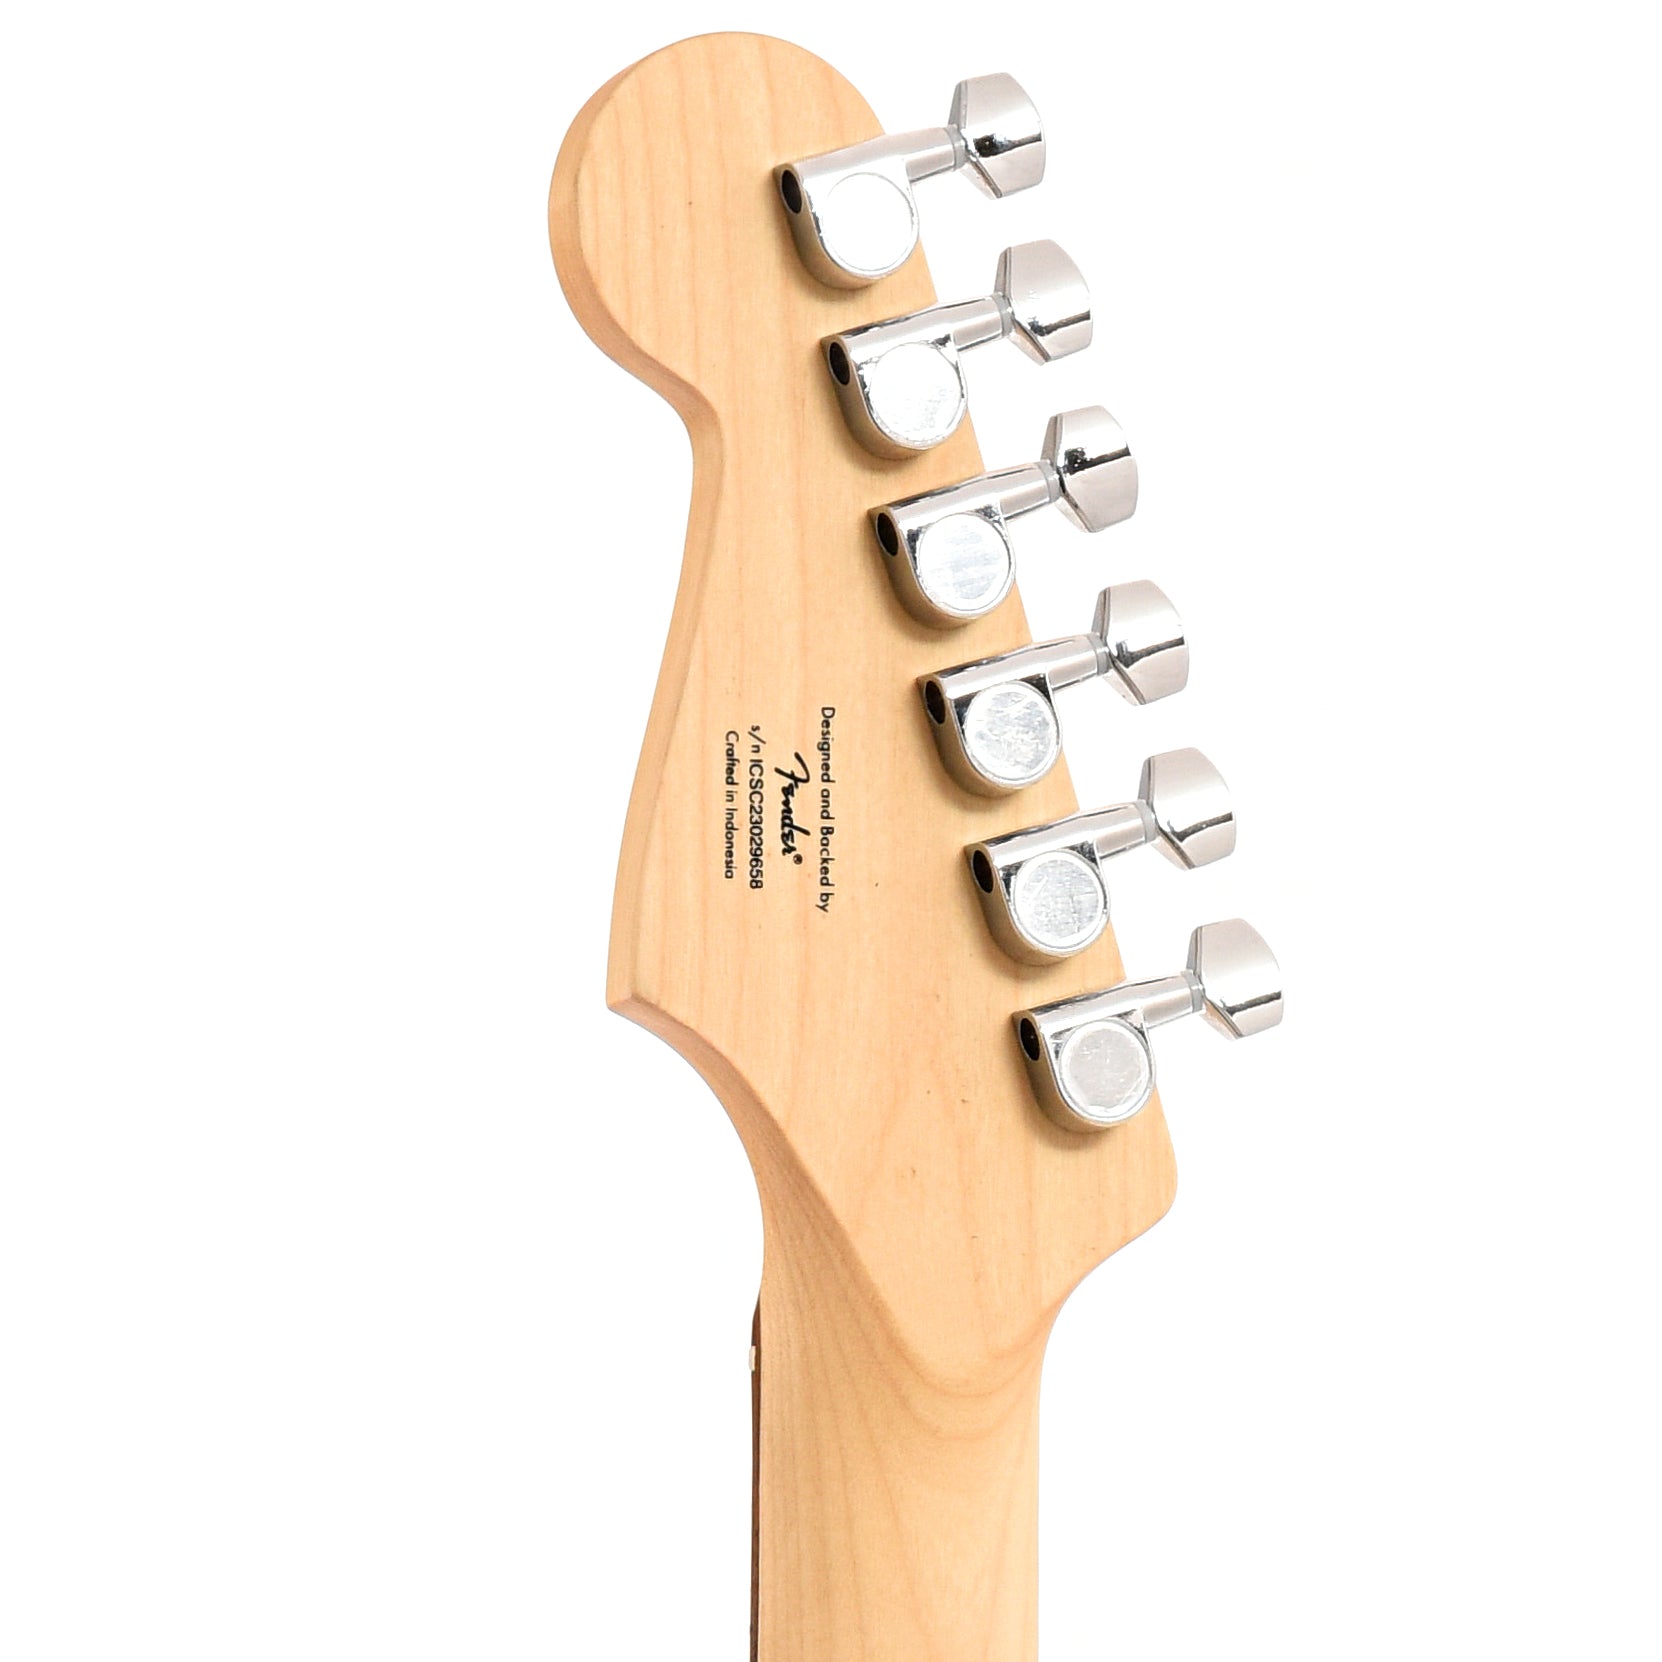 Back headstock of Squier Sonic Stratocaster, California Blue